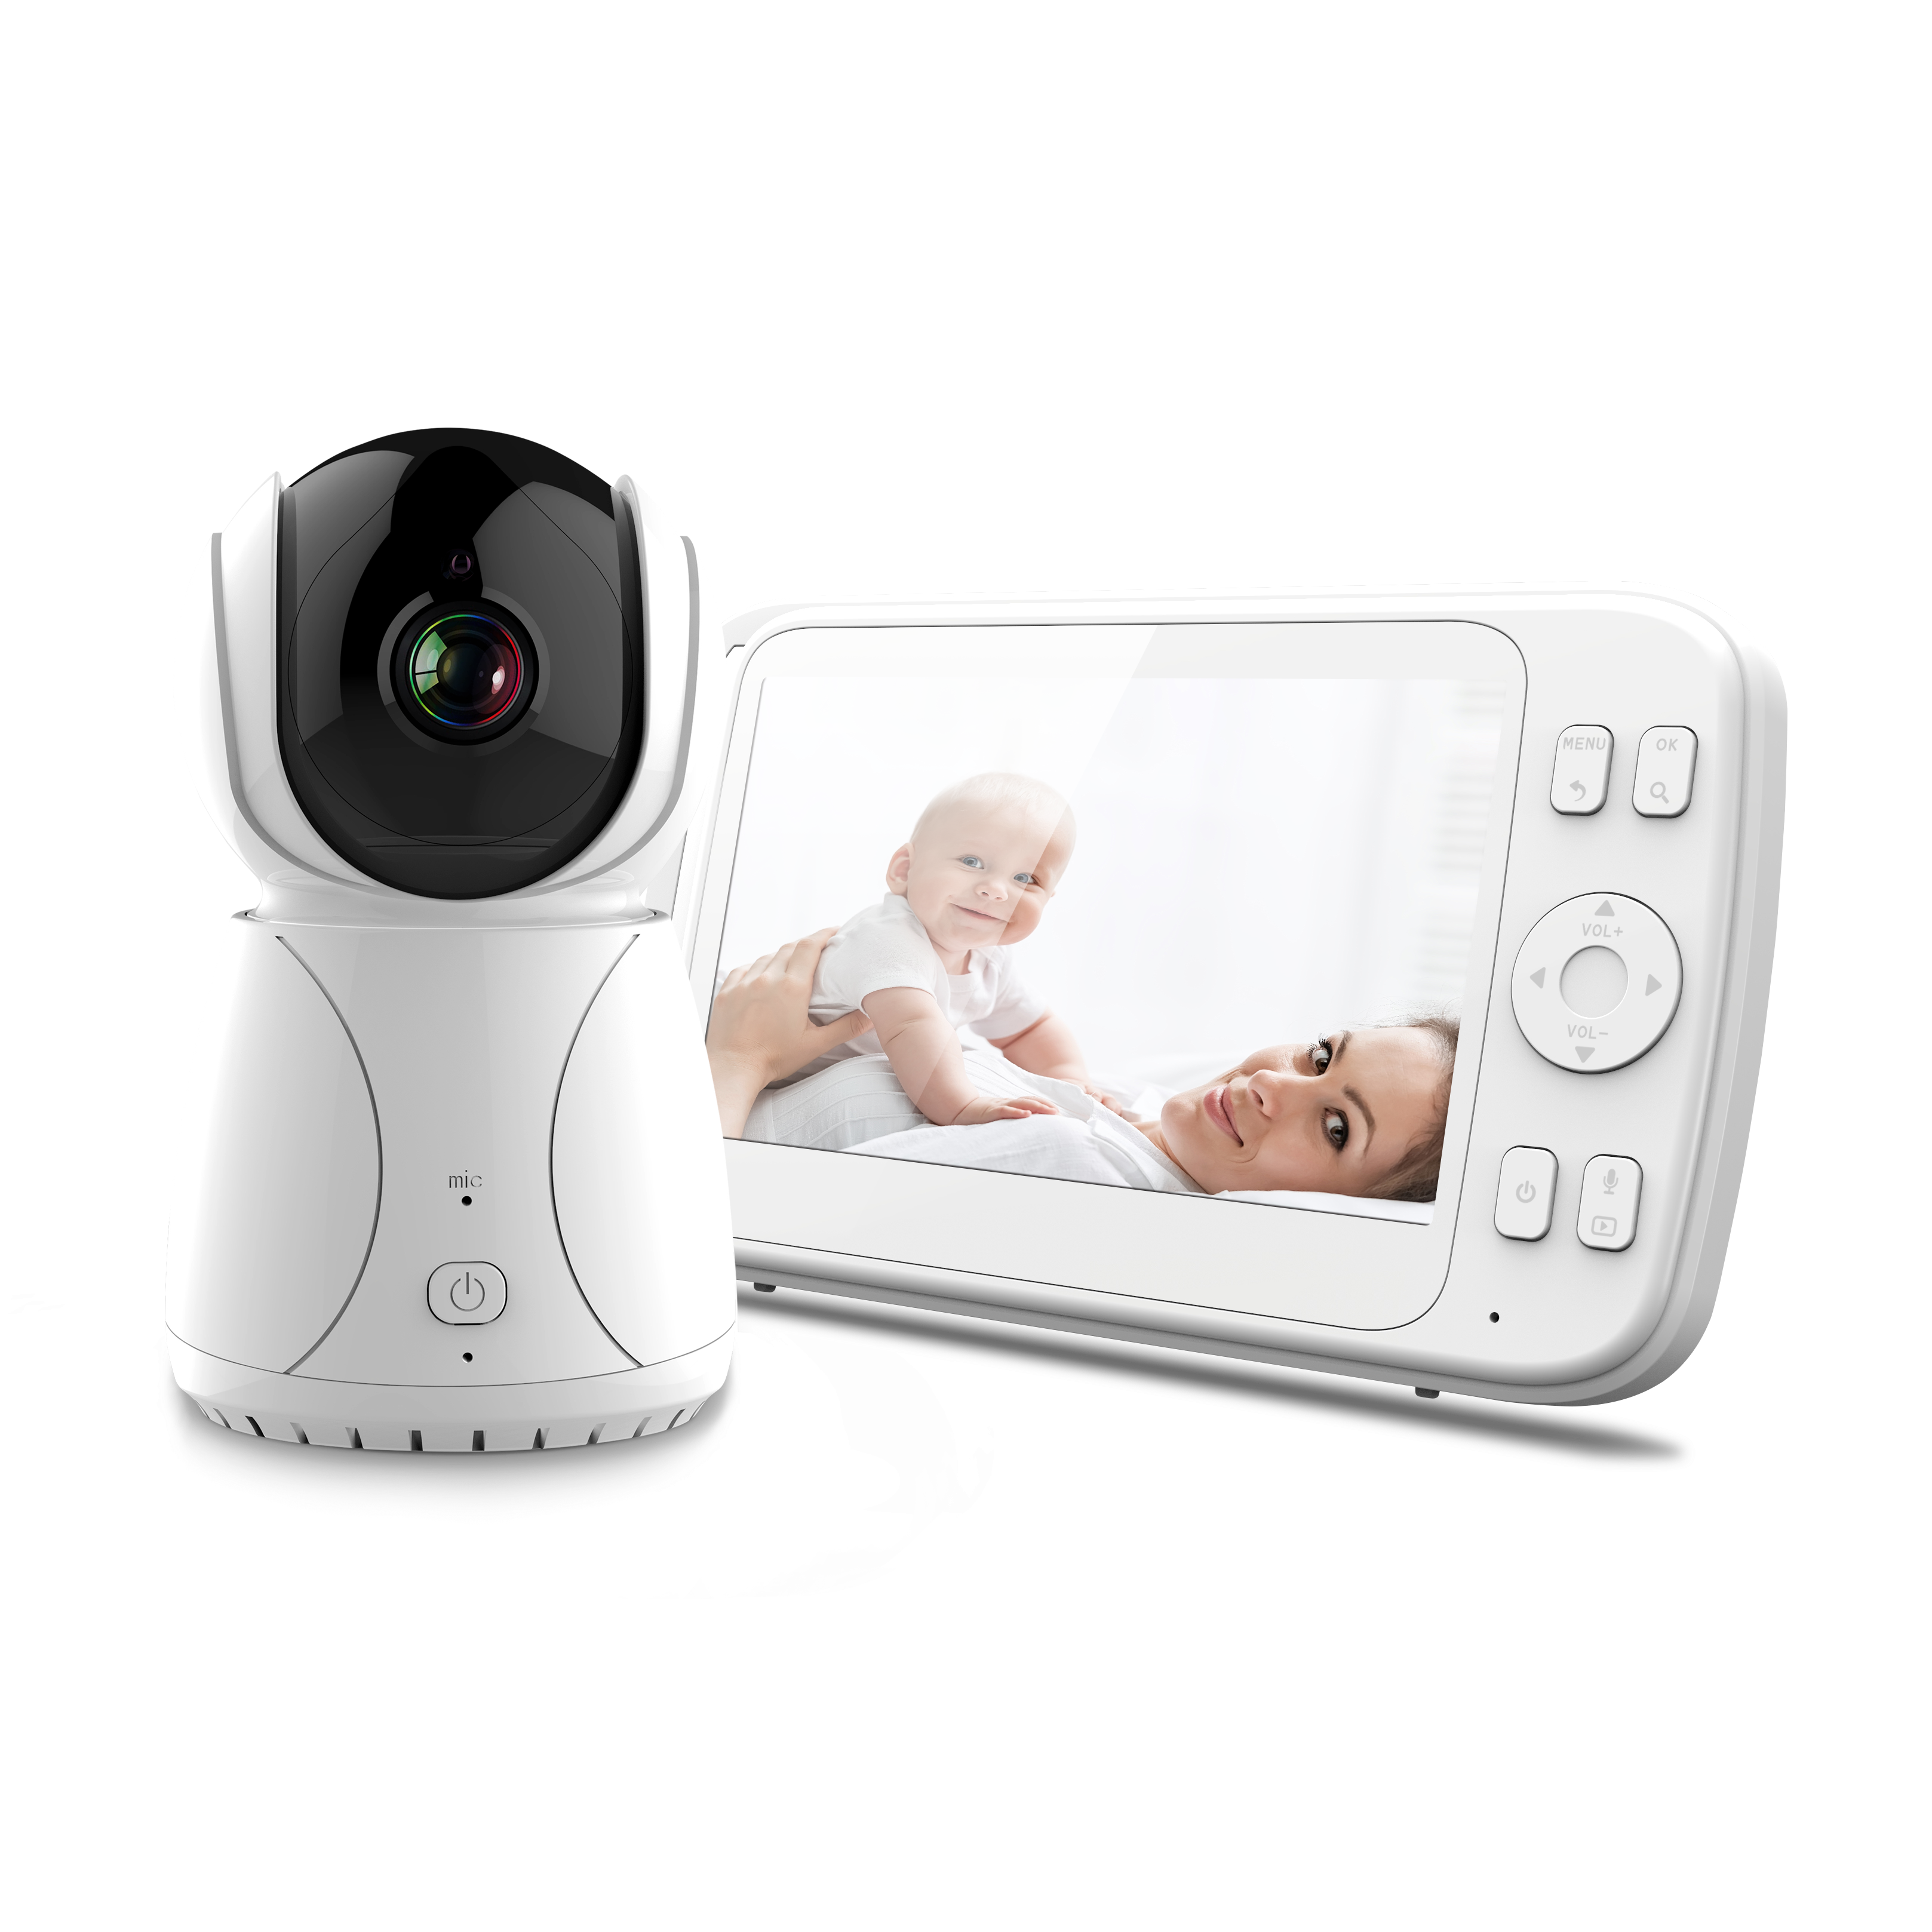 DC-508 Video Baby Monitor